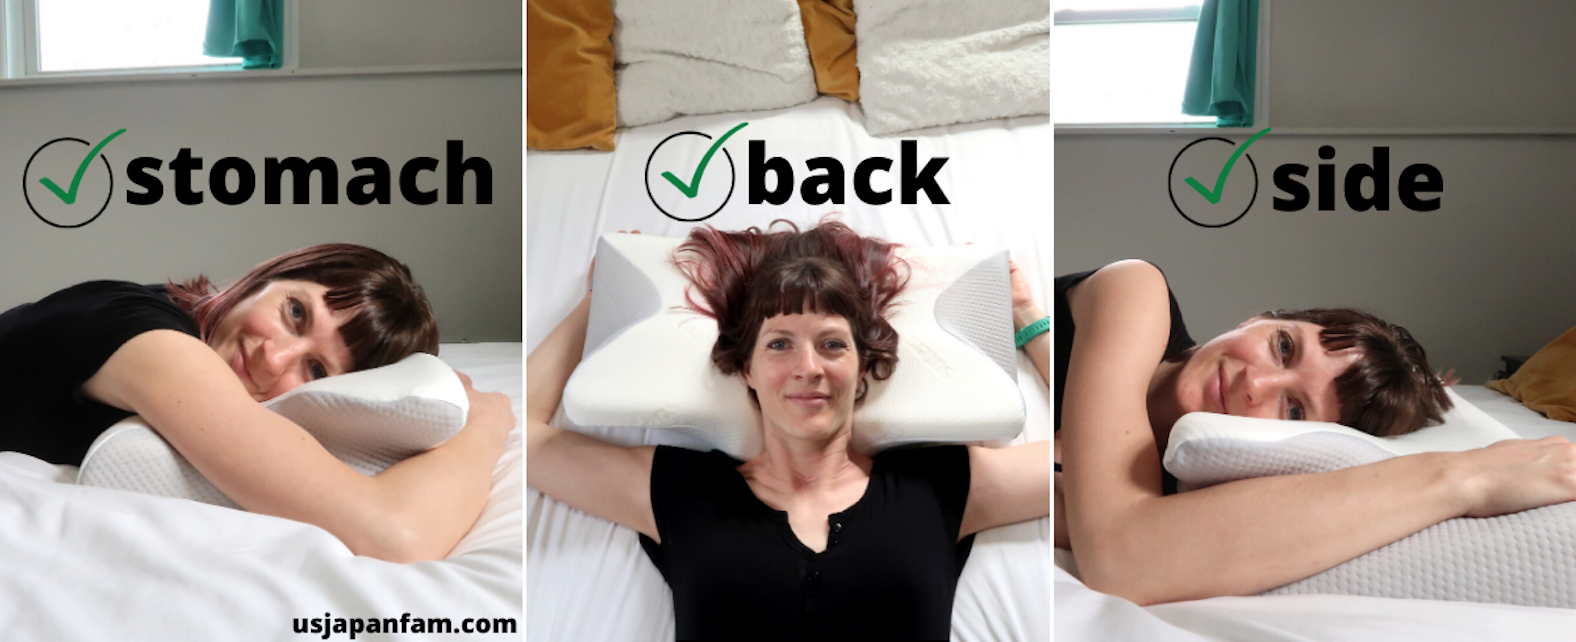 usjapanfam reviews sutera dream deep memory foam contour pillow for all sleepers: stomach, back and side!